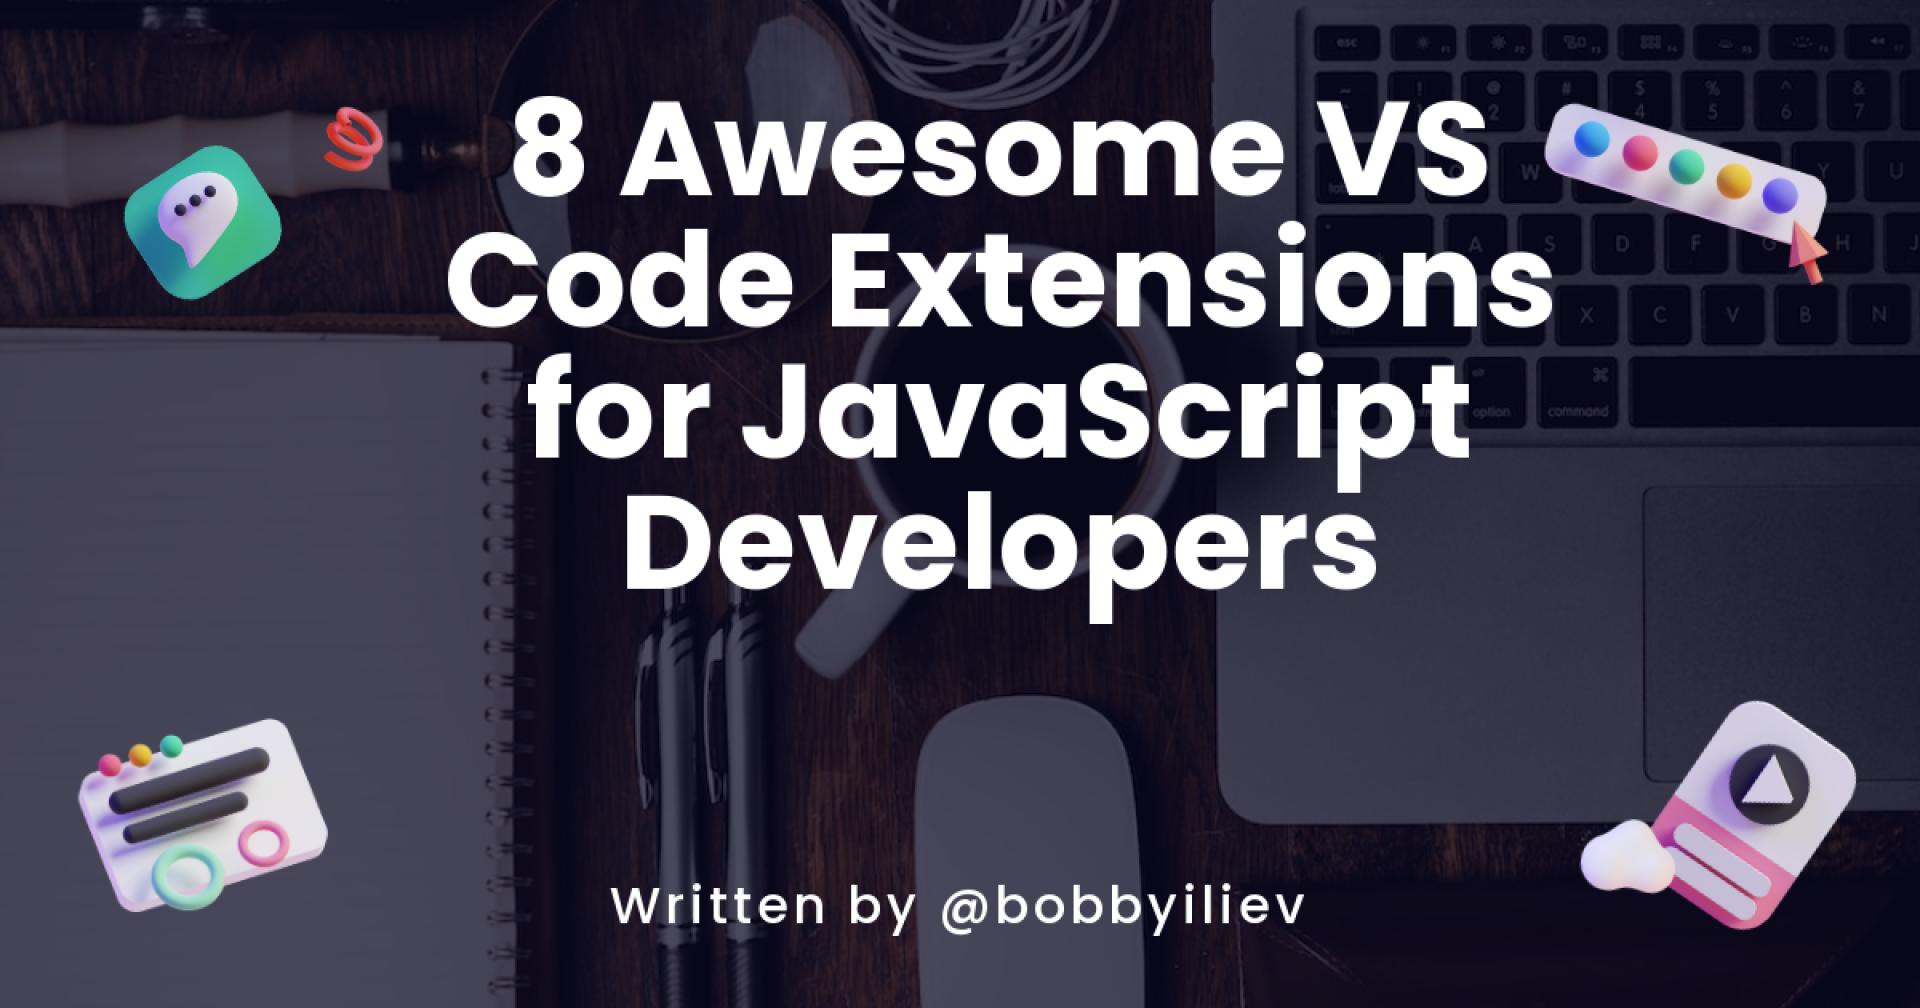 8 Awesome VS Code Extensions for JavaScript Developers